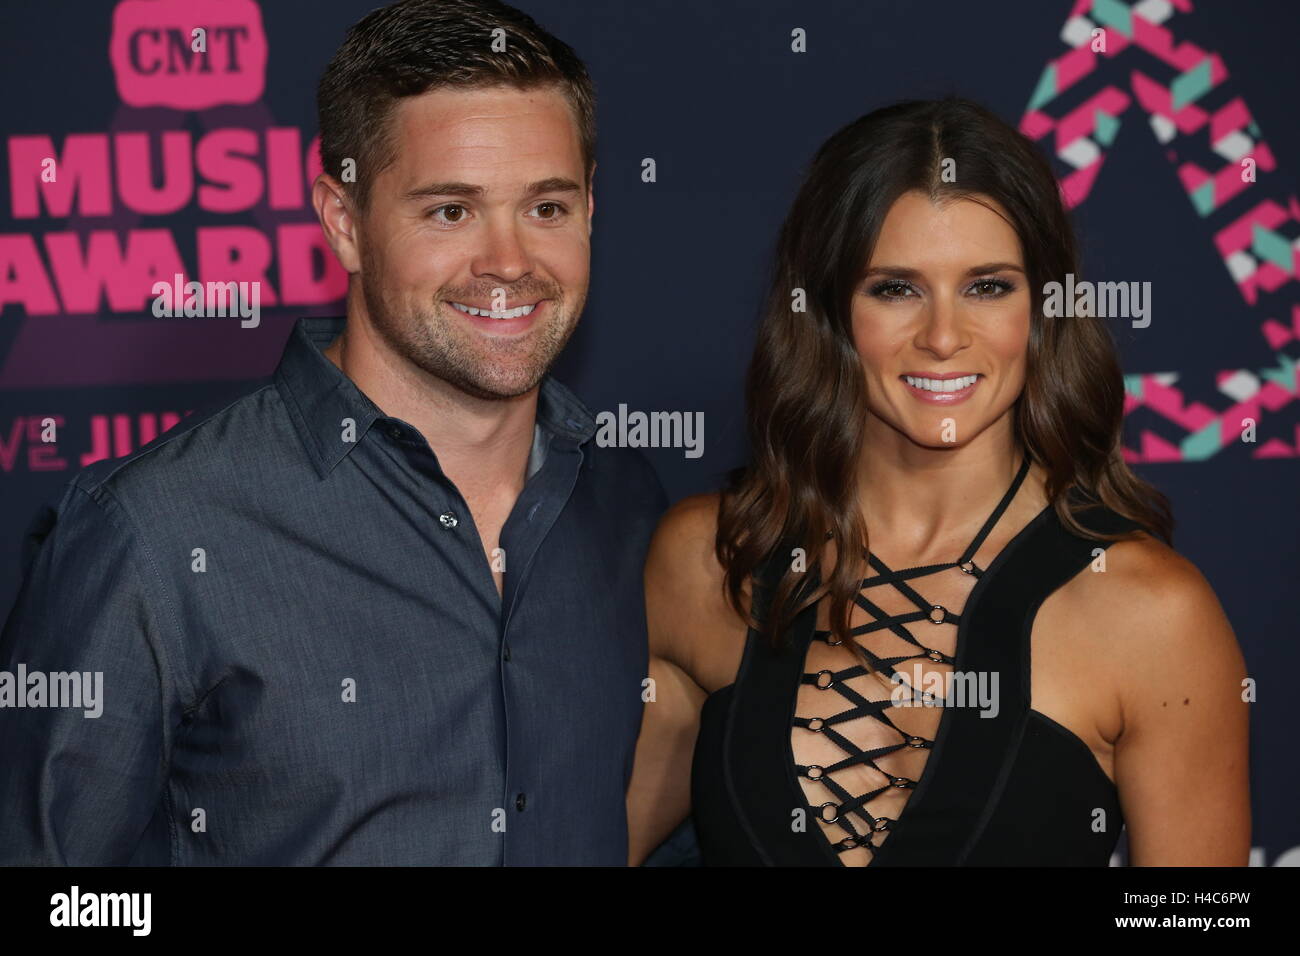 Ricky Stenhouse Jr. walks wife Danica Patrick down the red carpet at the CMT Music Awards at Bridgestone Arena on June 8th, 2016 in Nashville, TN. Stock Photo